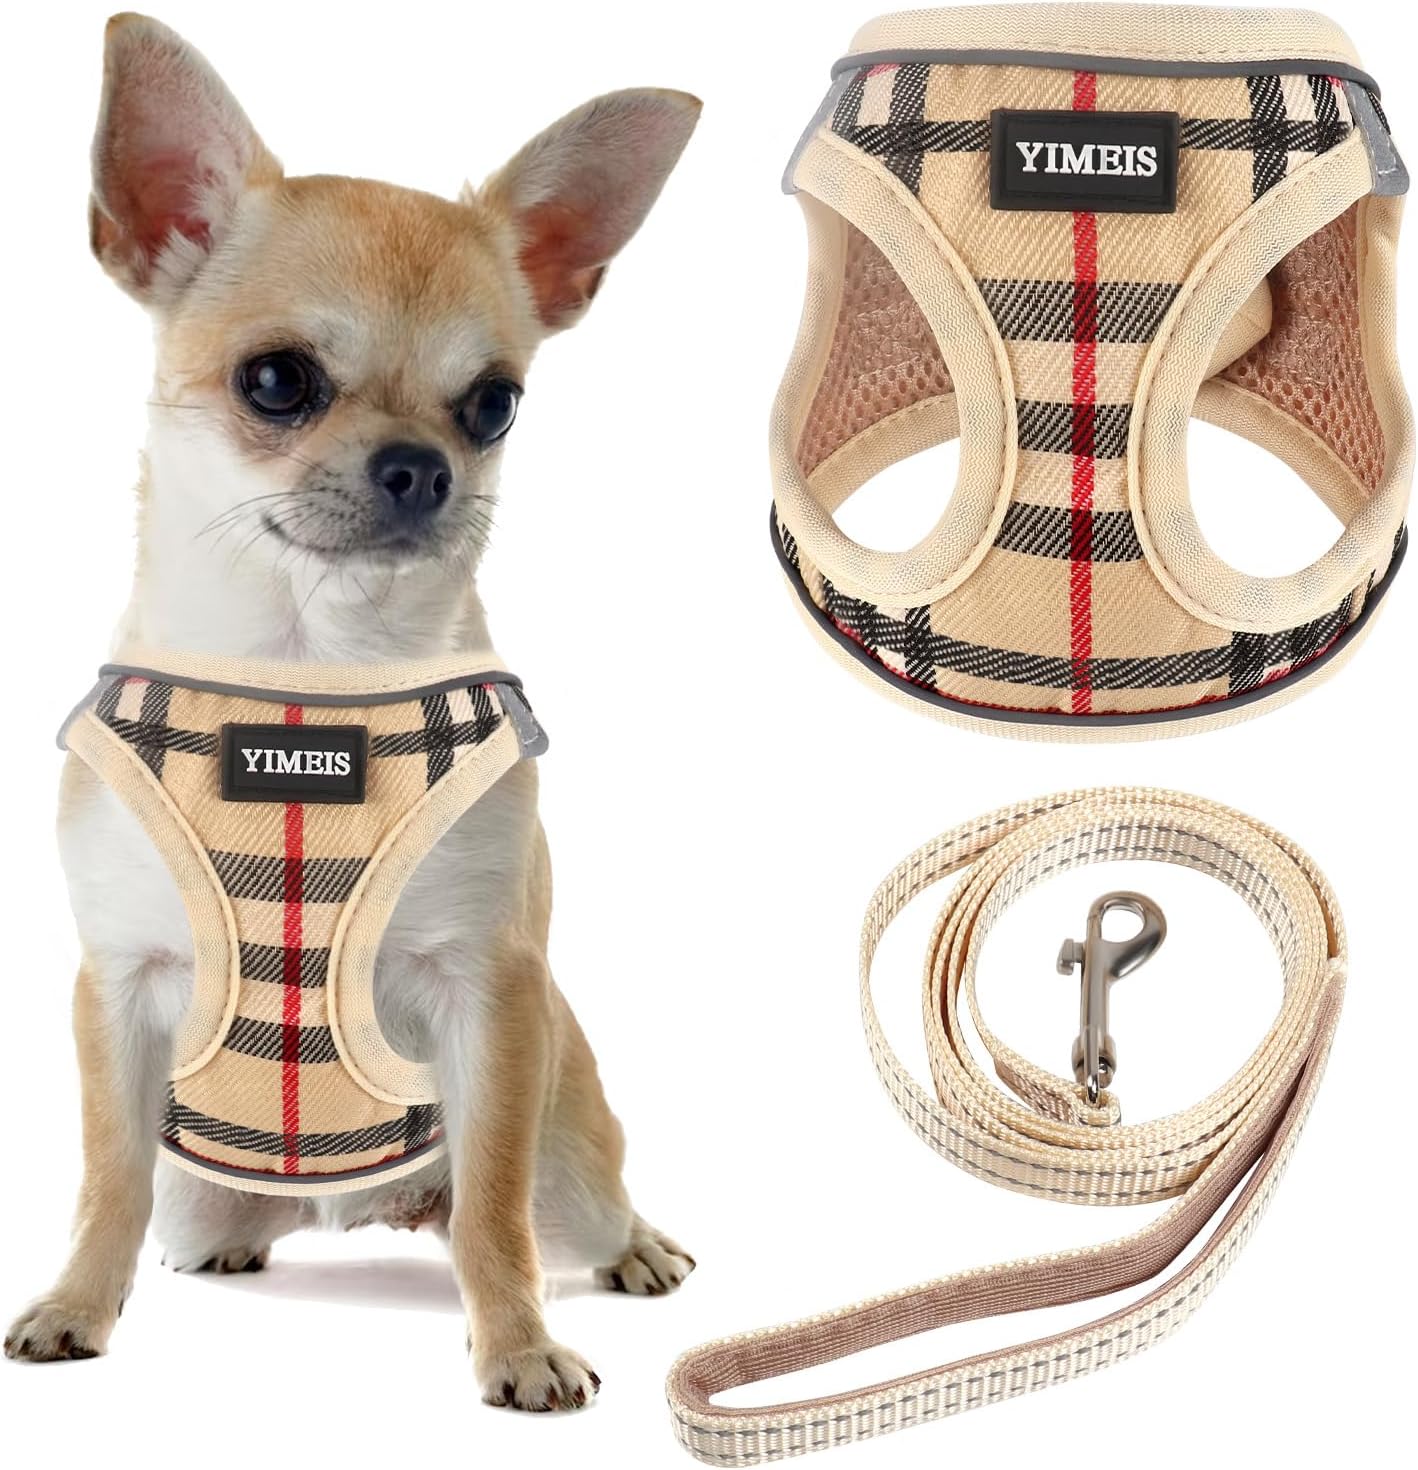 YIMEIS Dog Harness and Leash Set, No Pull Soft Mesh Pet Harness, Reflective Adjustable Puppy Vest for Small Medium Large Dogs, Cats (Beige, Medium (Pack of 1)